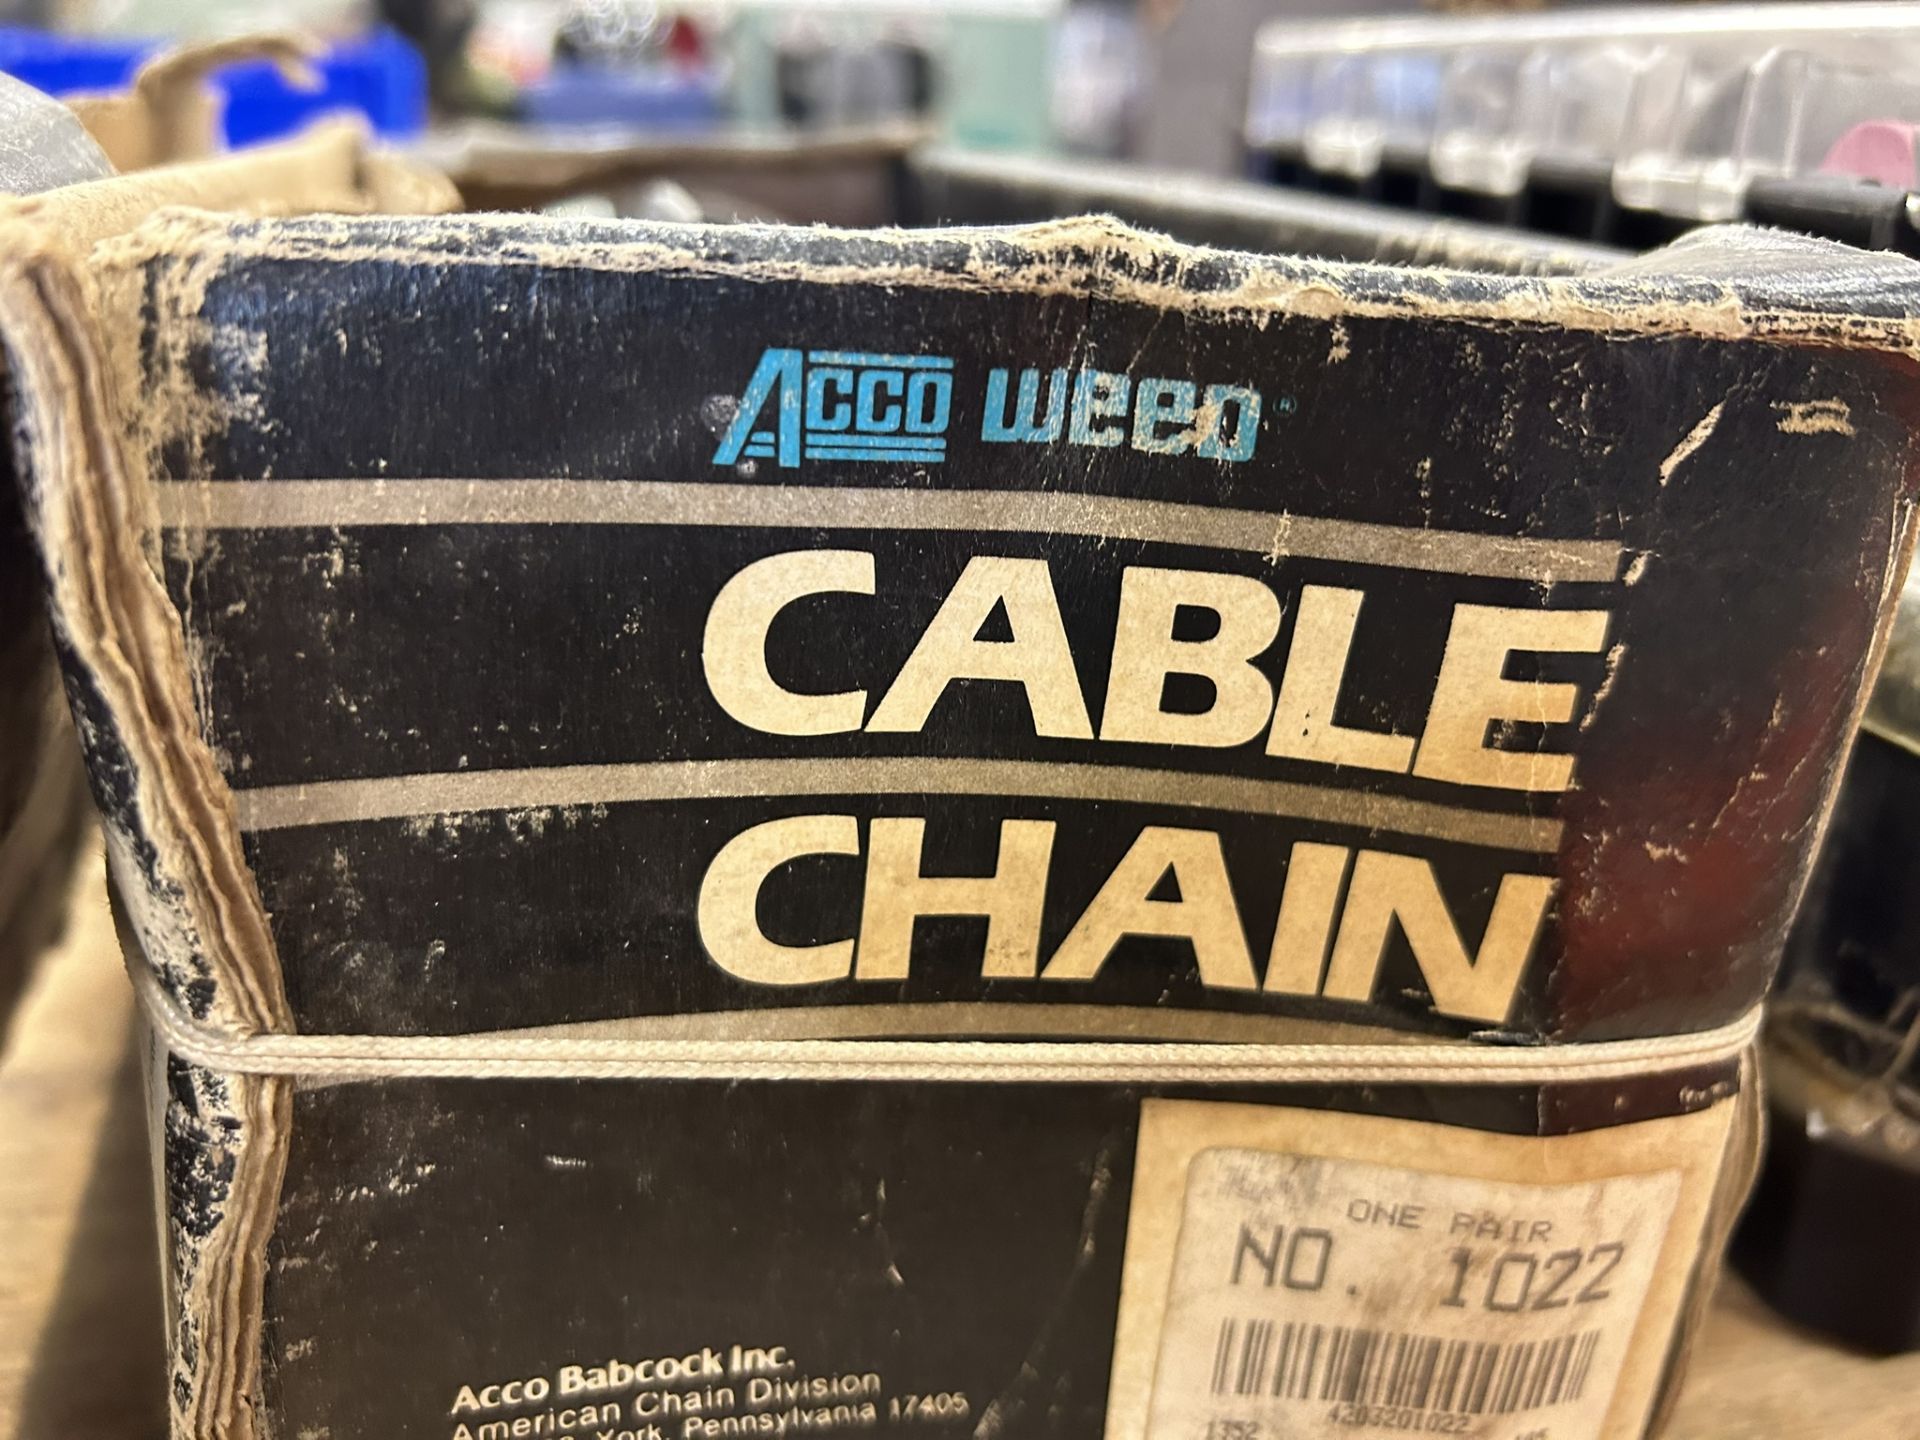 1 PAIR OF CABLE TIRE CHAINS, PART # 1022 - Image 2 of 2